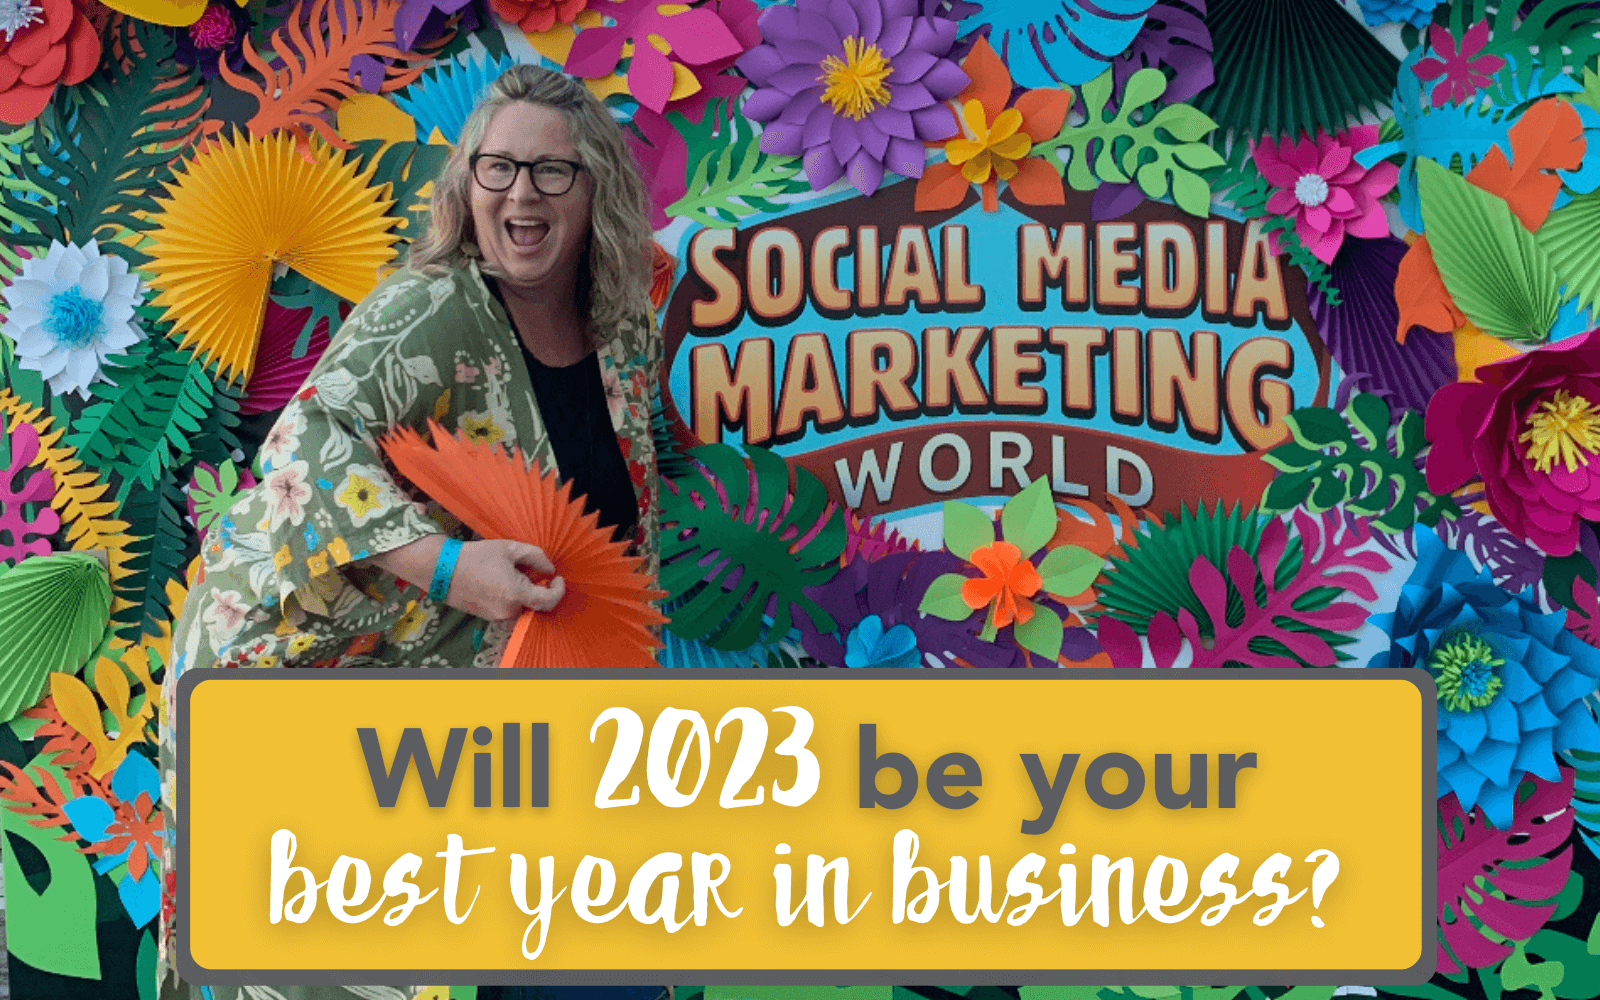 make 2023 your best year in business